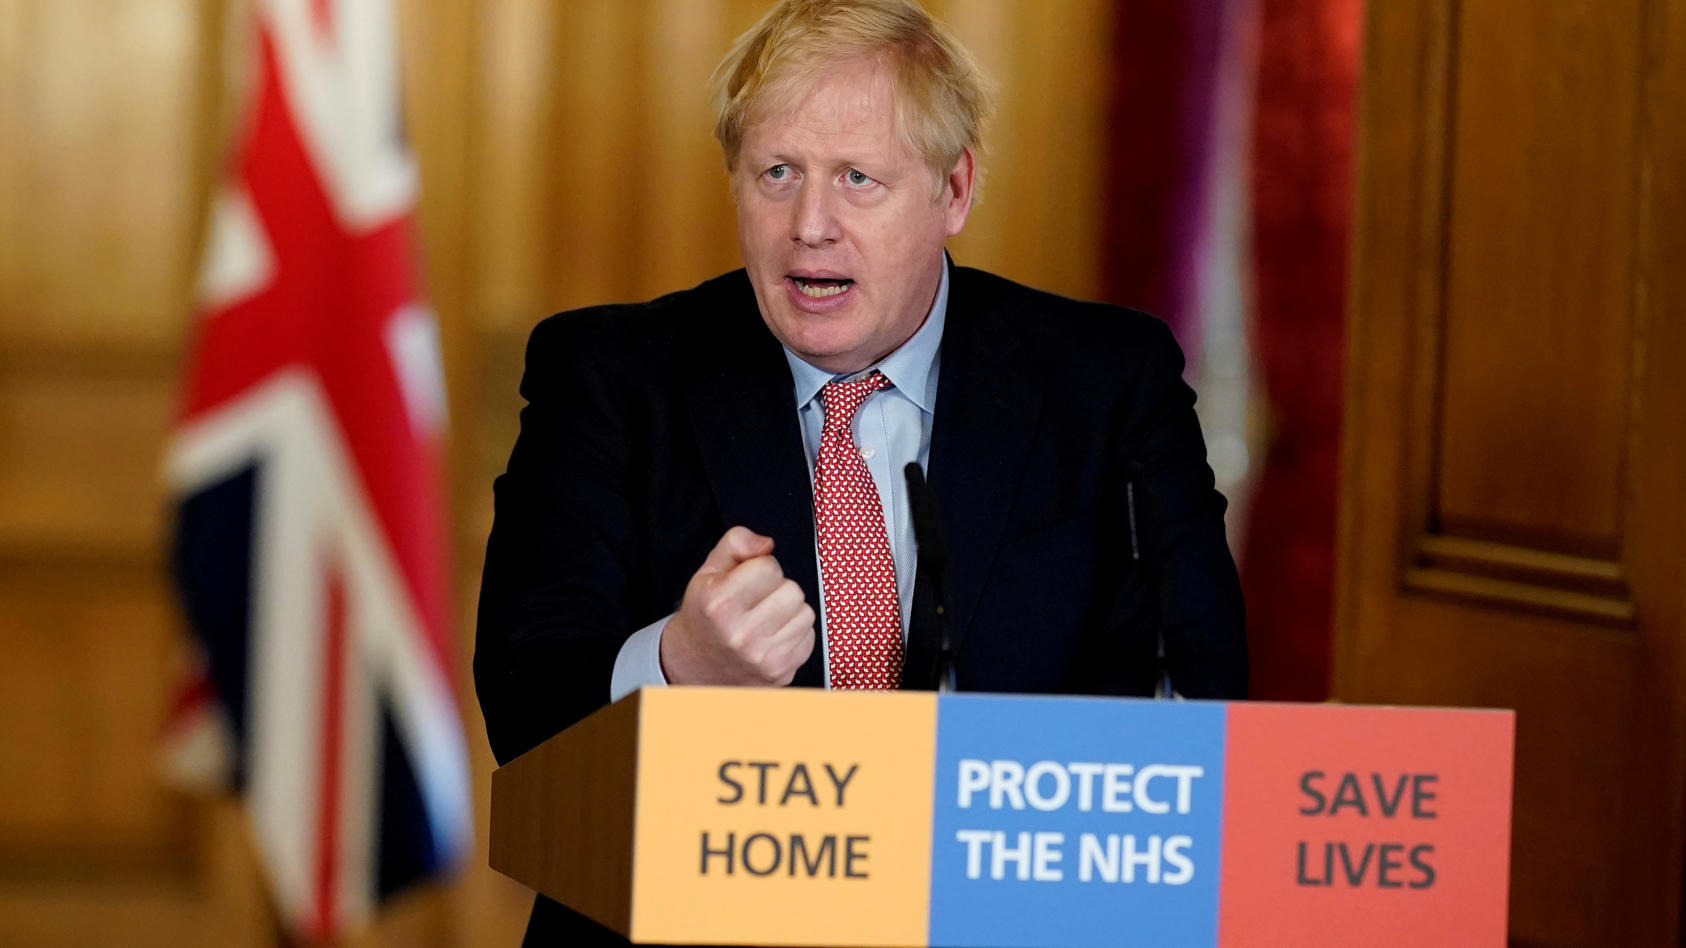 Britain's Prime Minister Boris Johnson speaks during his first remote news conference on the coronavirus disease (COVID-19) outbreak, in London